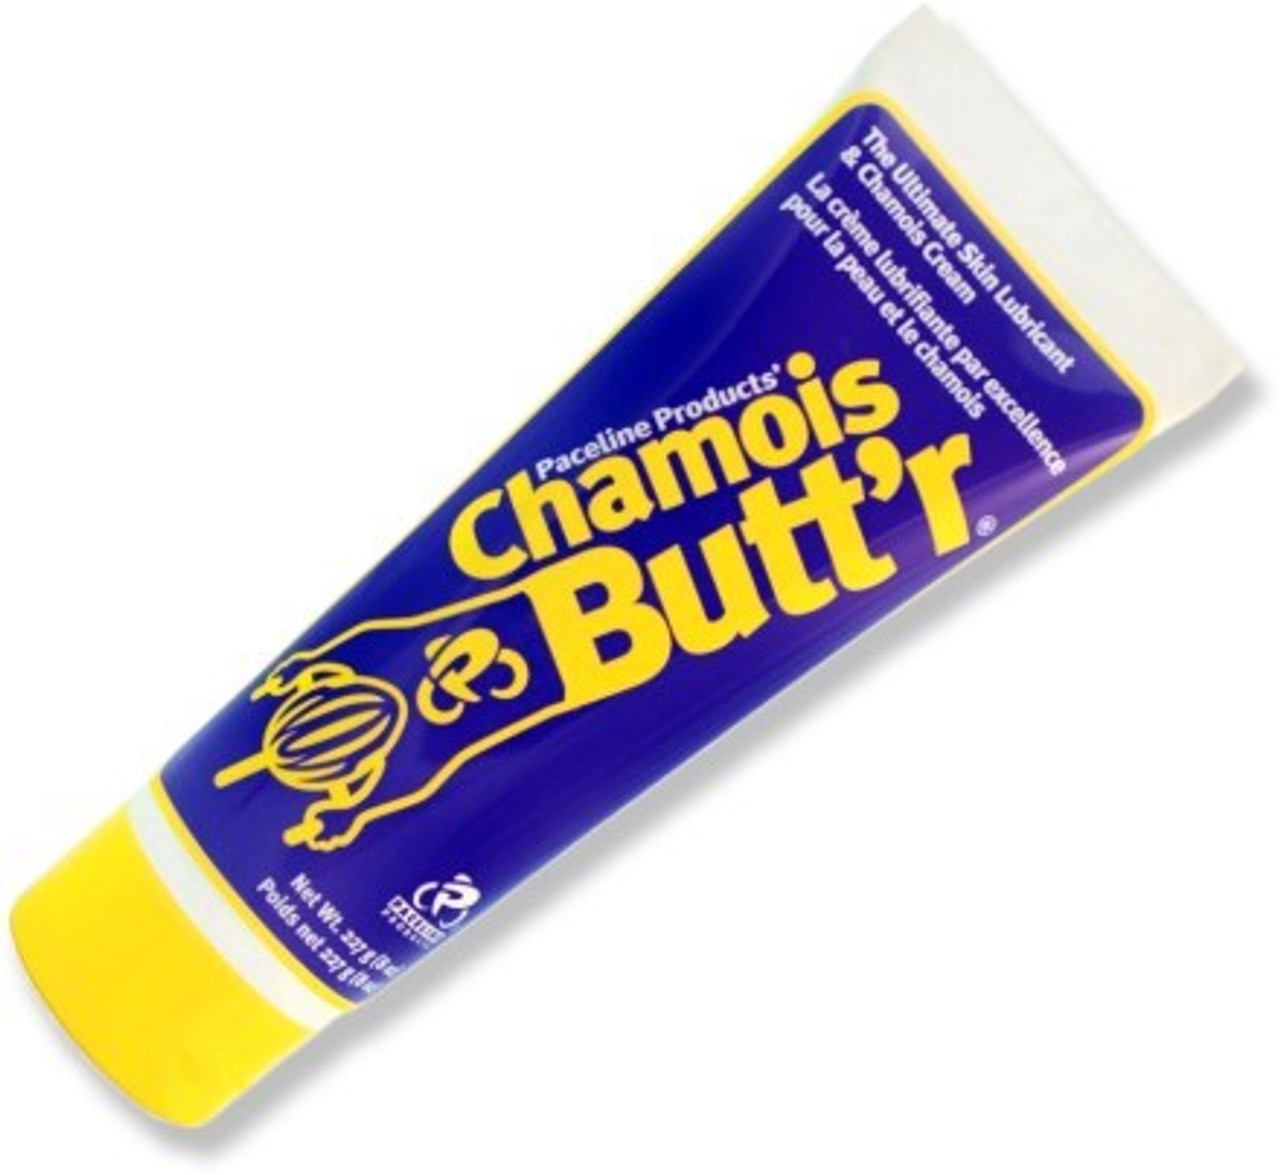 chamois butter for cycling